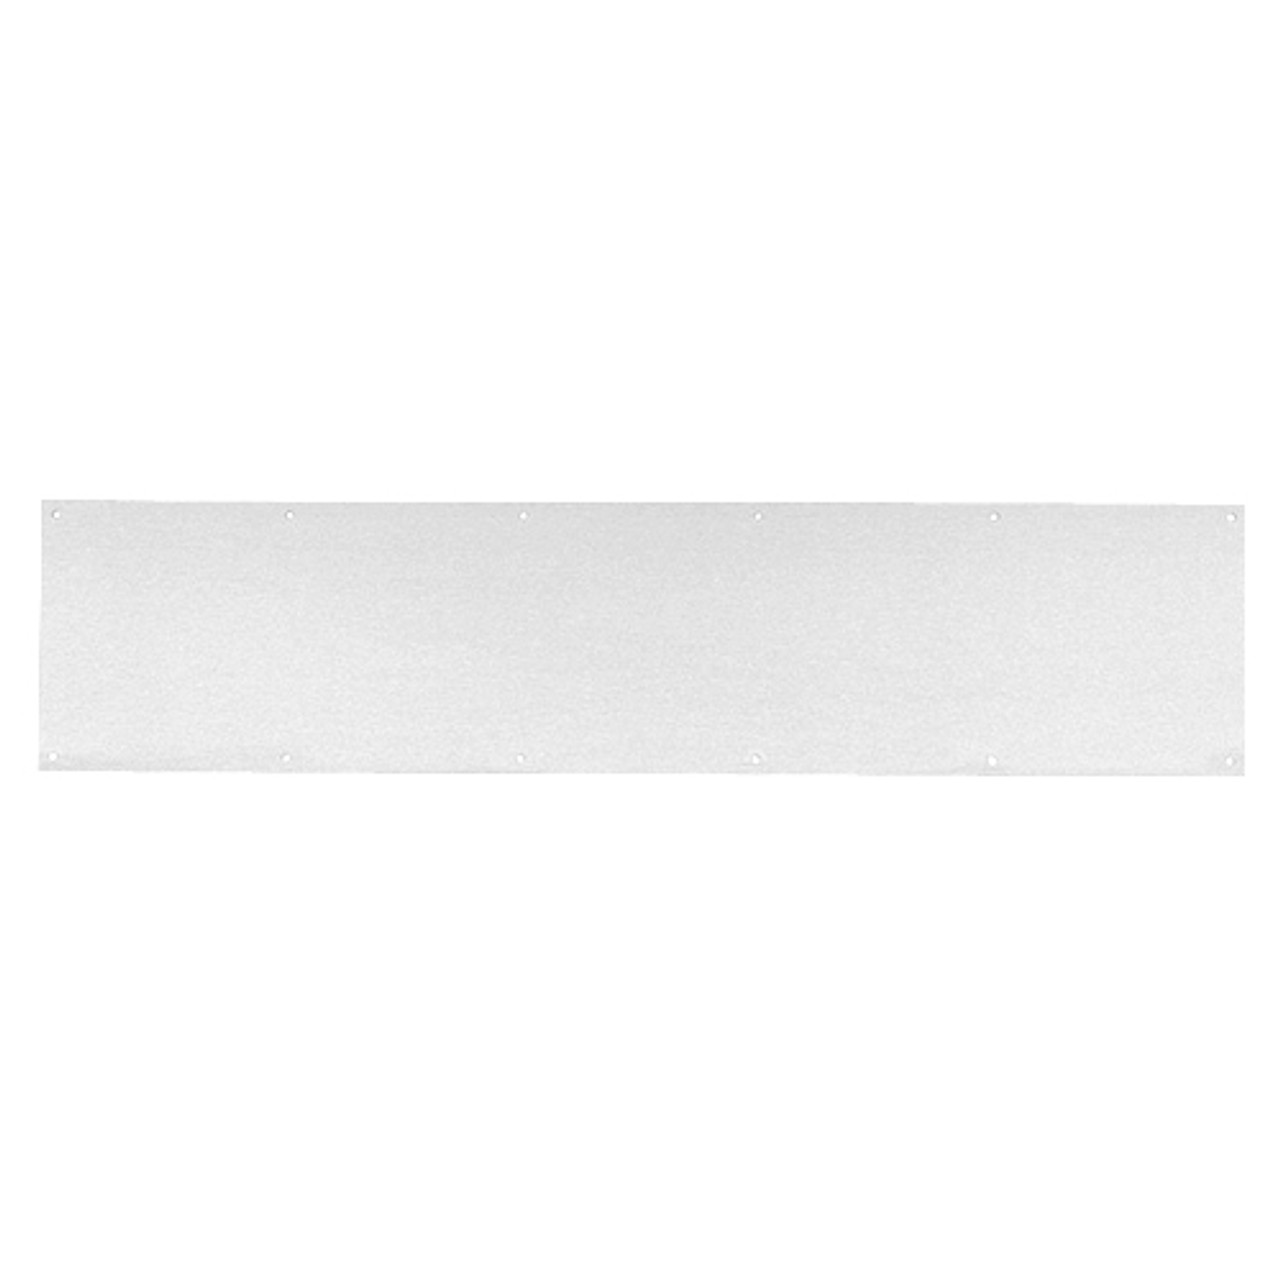 8400-US28-6x46-B-CS Ives 8400 Series Protection Plate in Aluminum